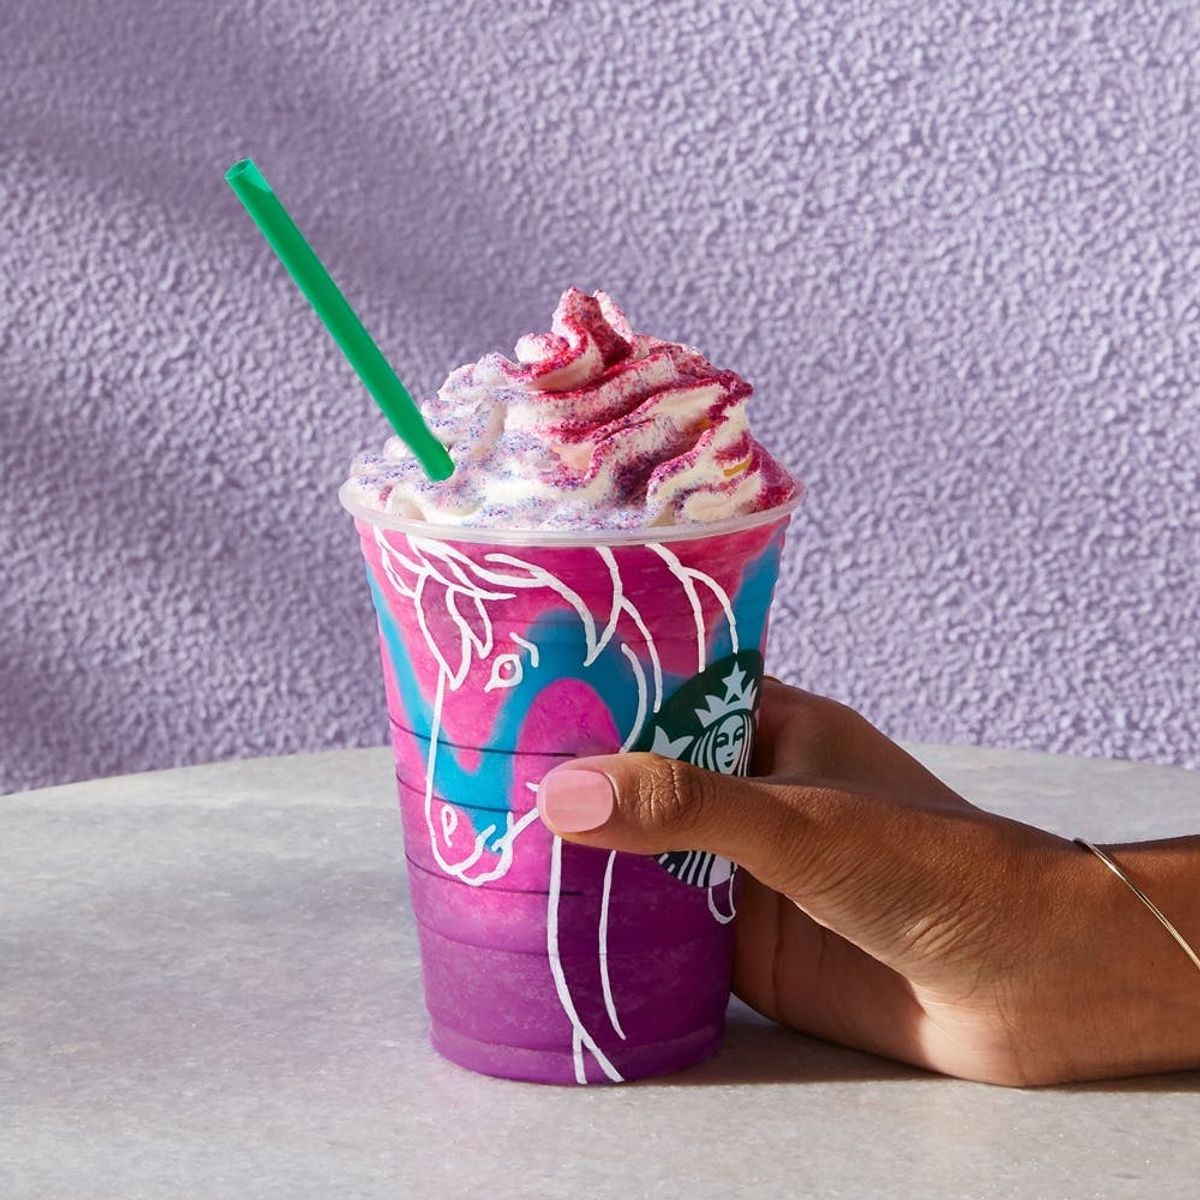 You Probably Missed the Most Magical Part of the Unicorn Frappuccino